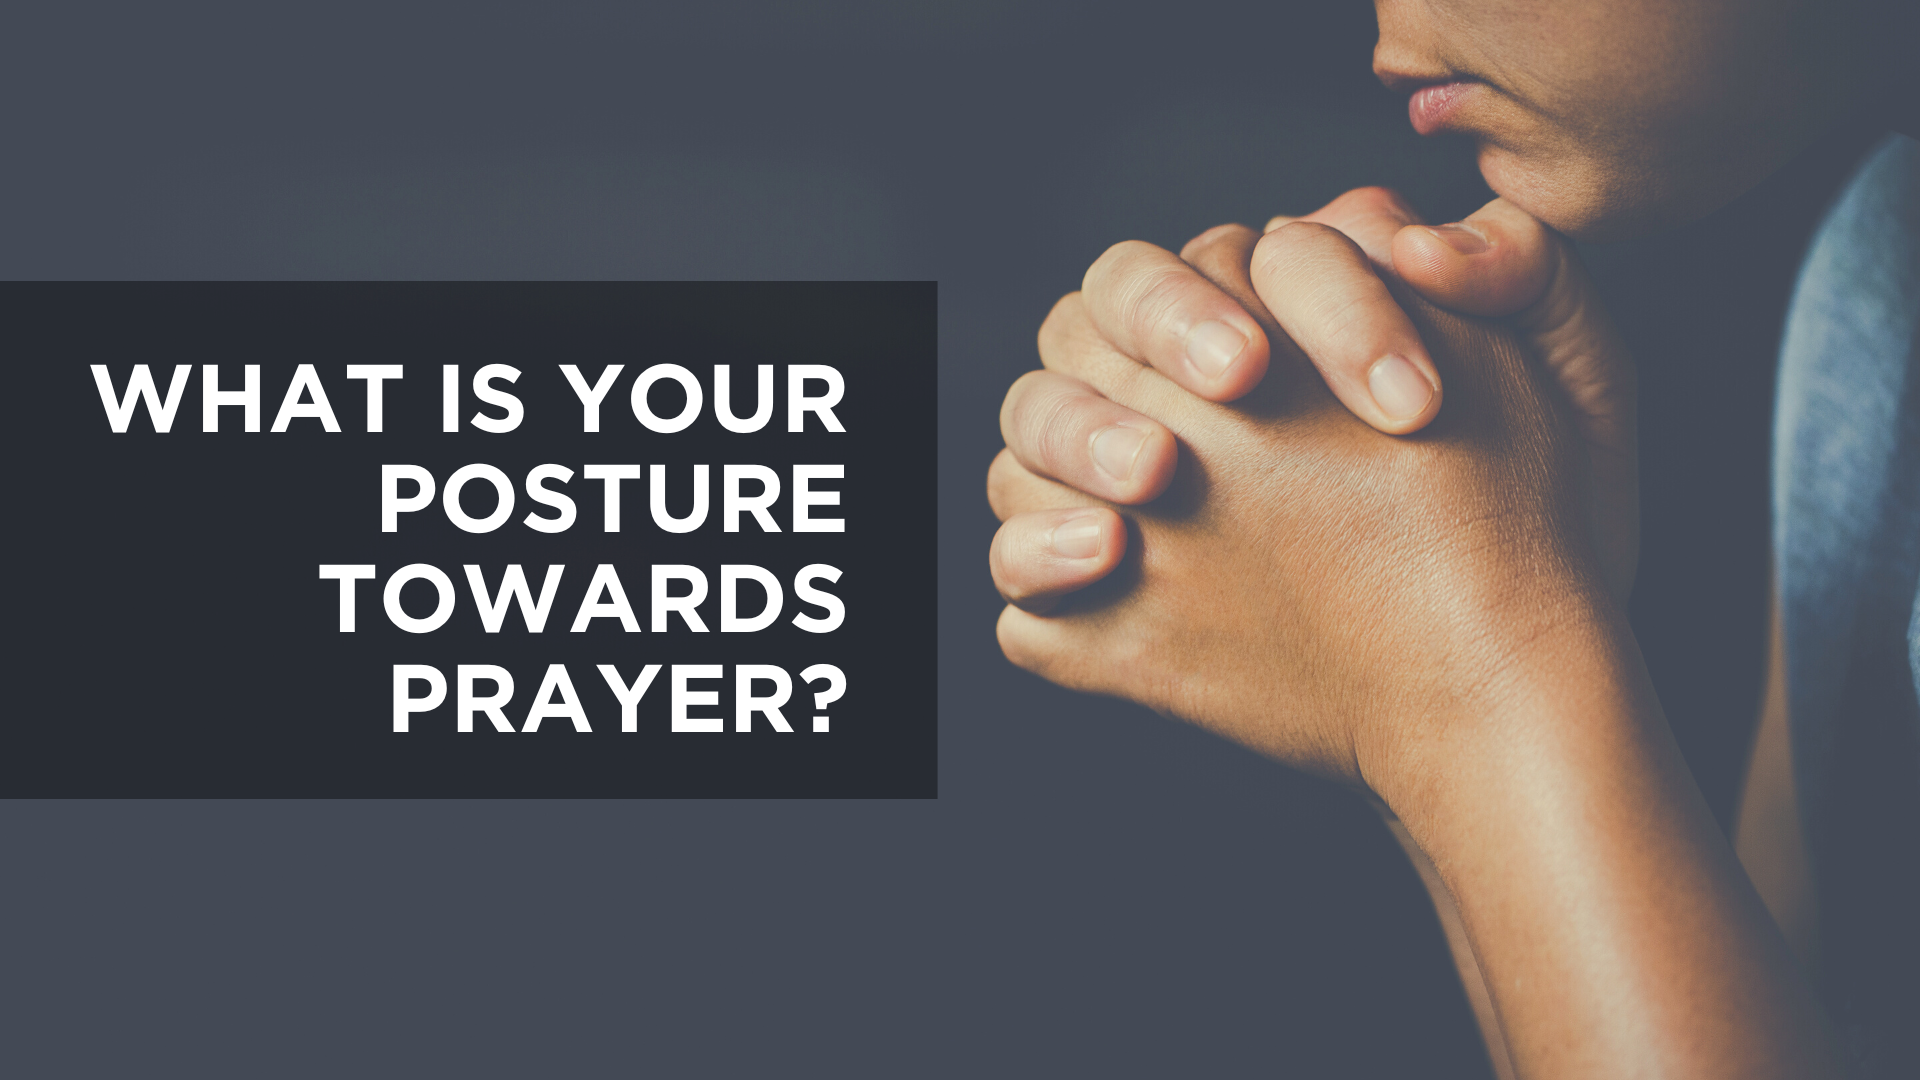 What Is Your Posture Towards Prayer?